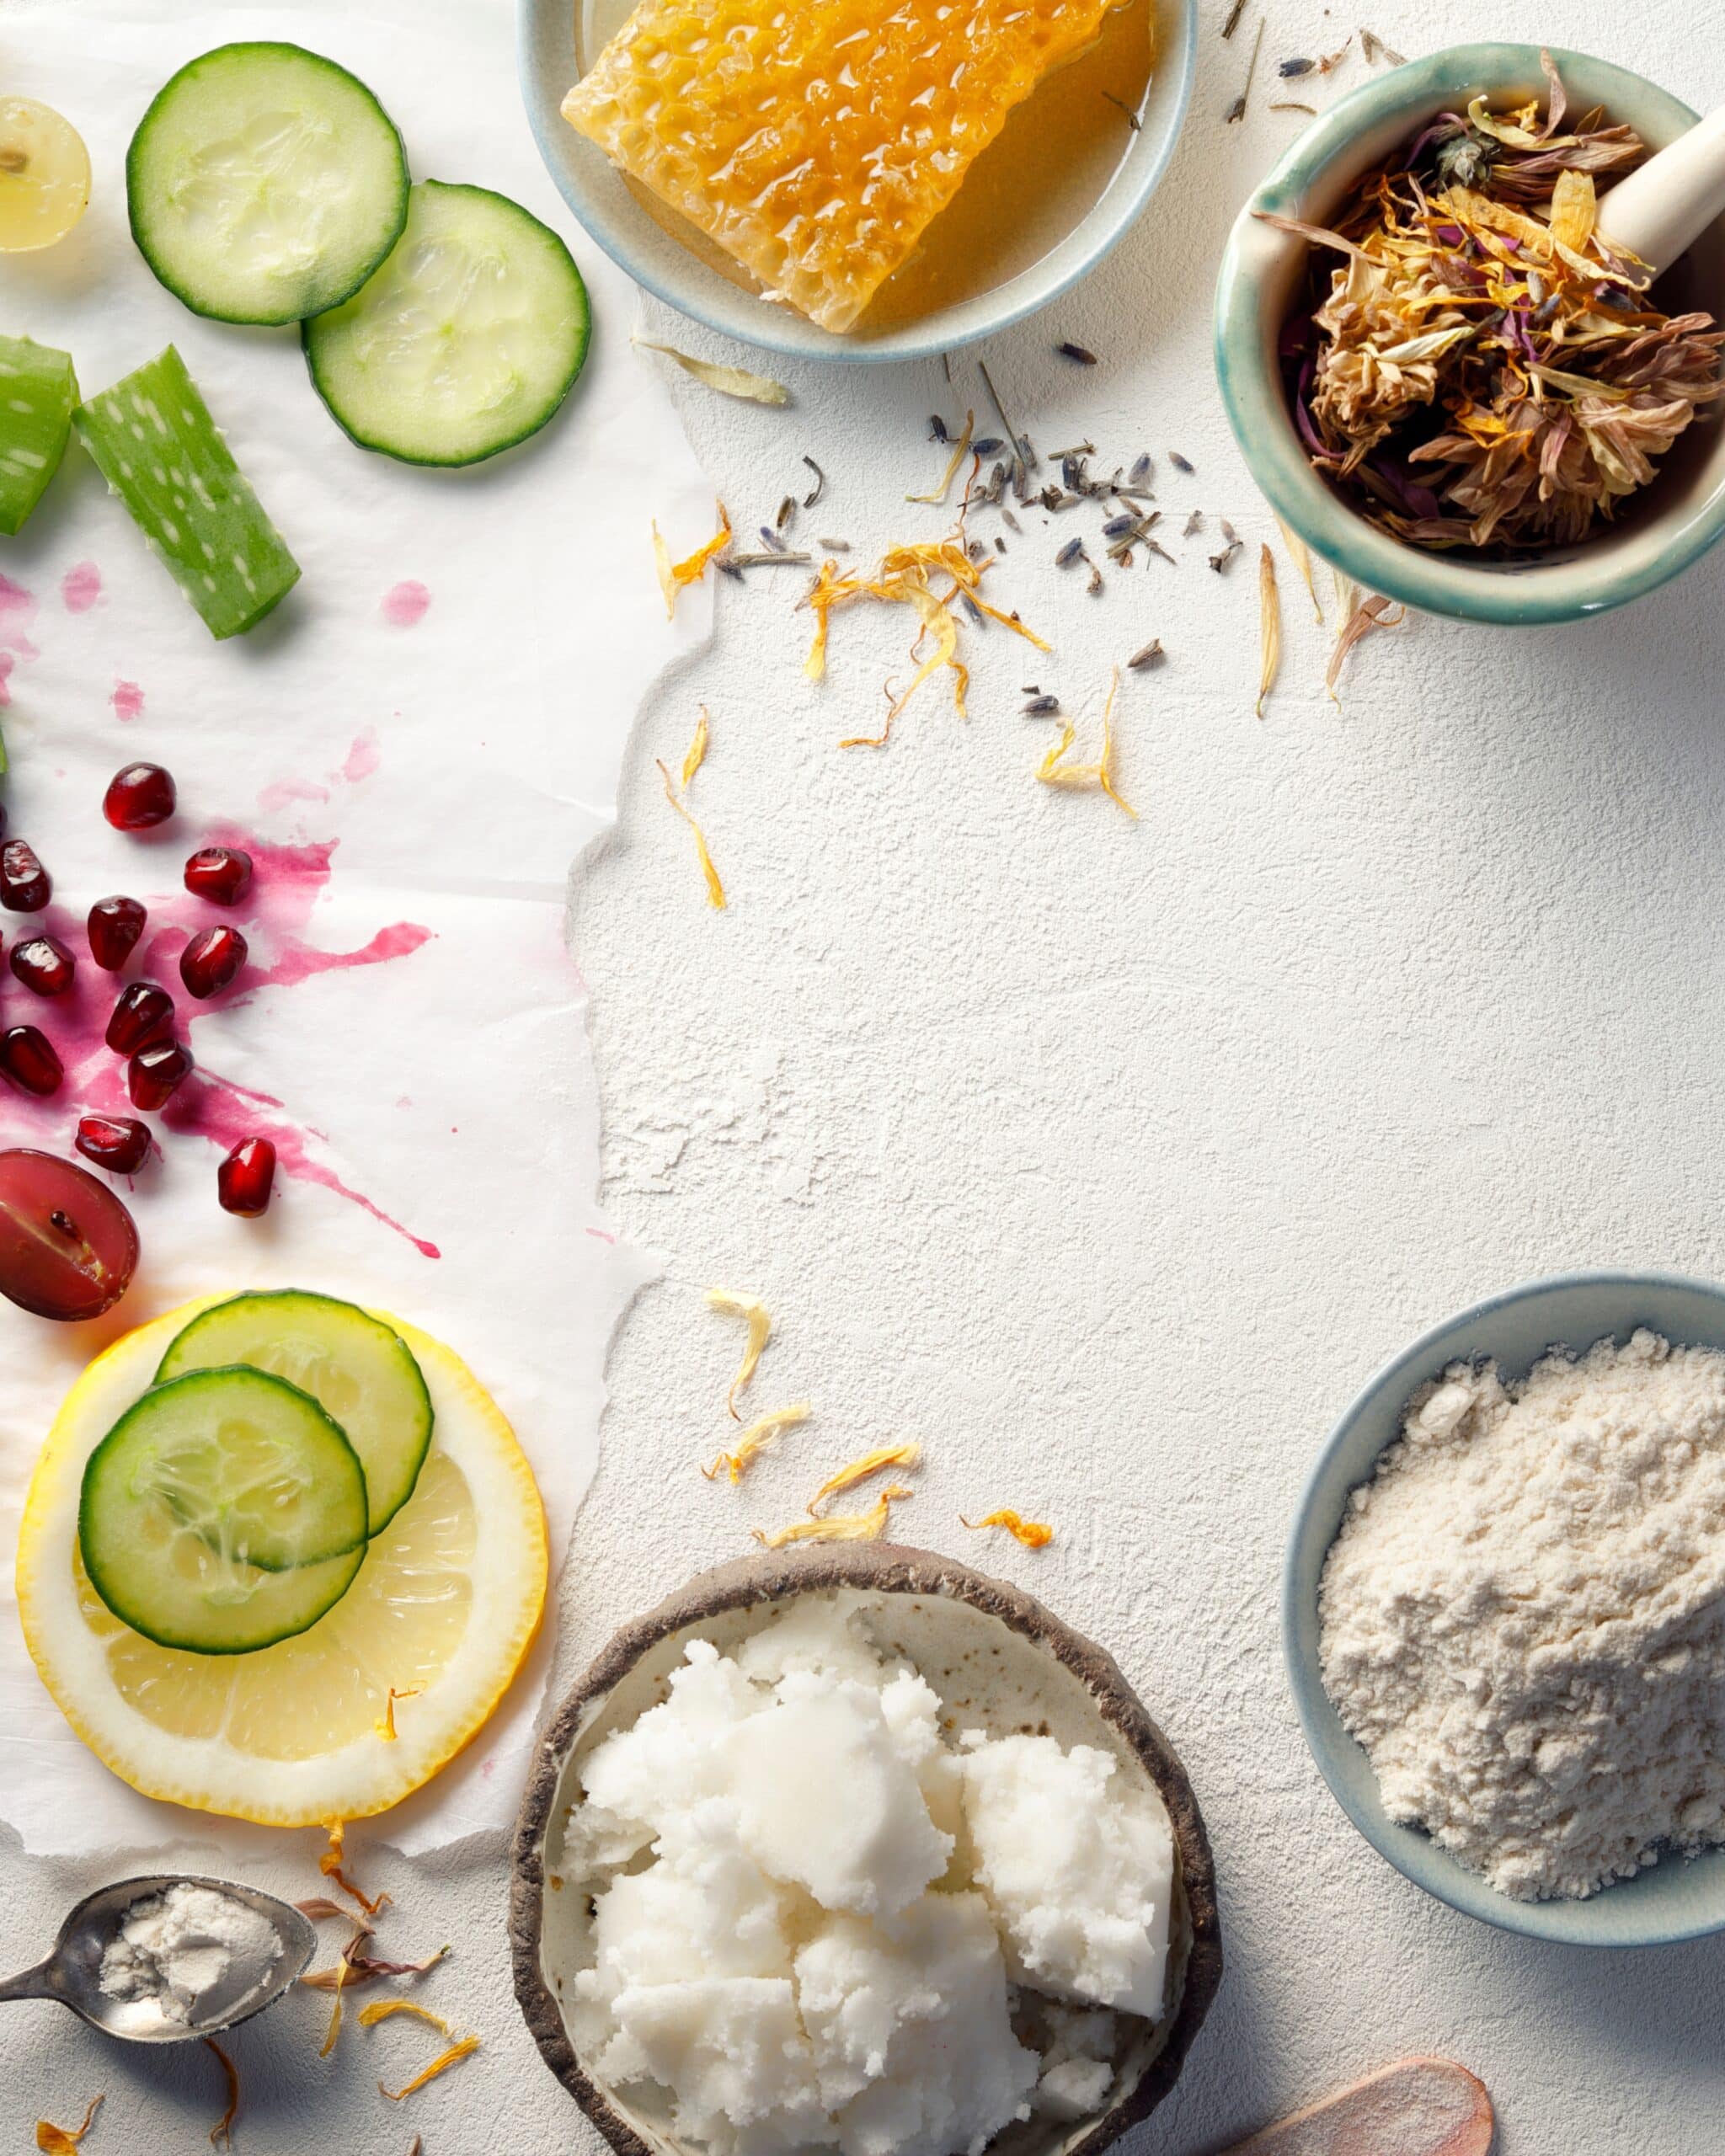 DIY Beauty How to Make Organic Skincare Recipes in the Kitchen